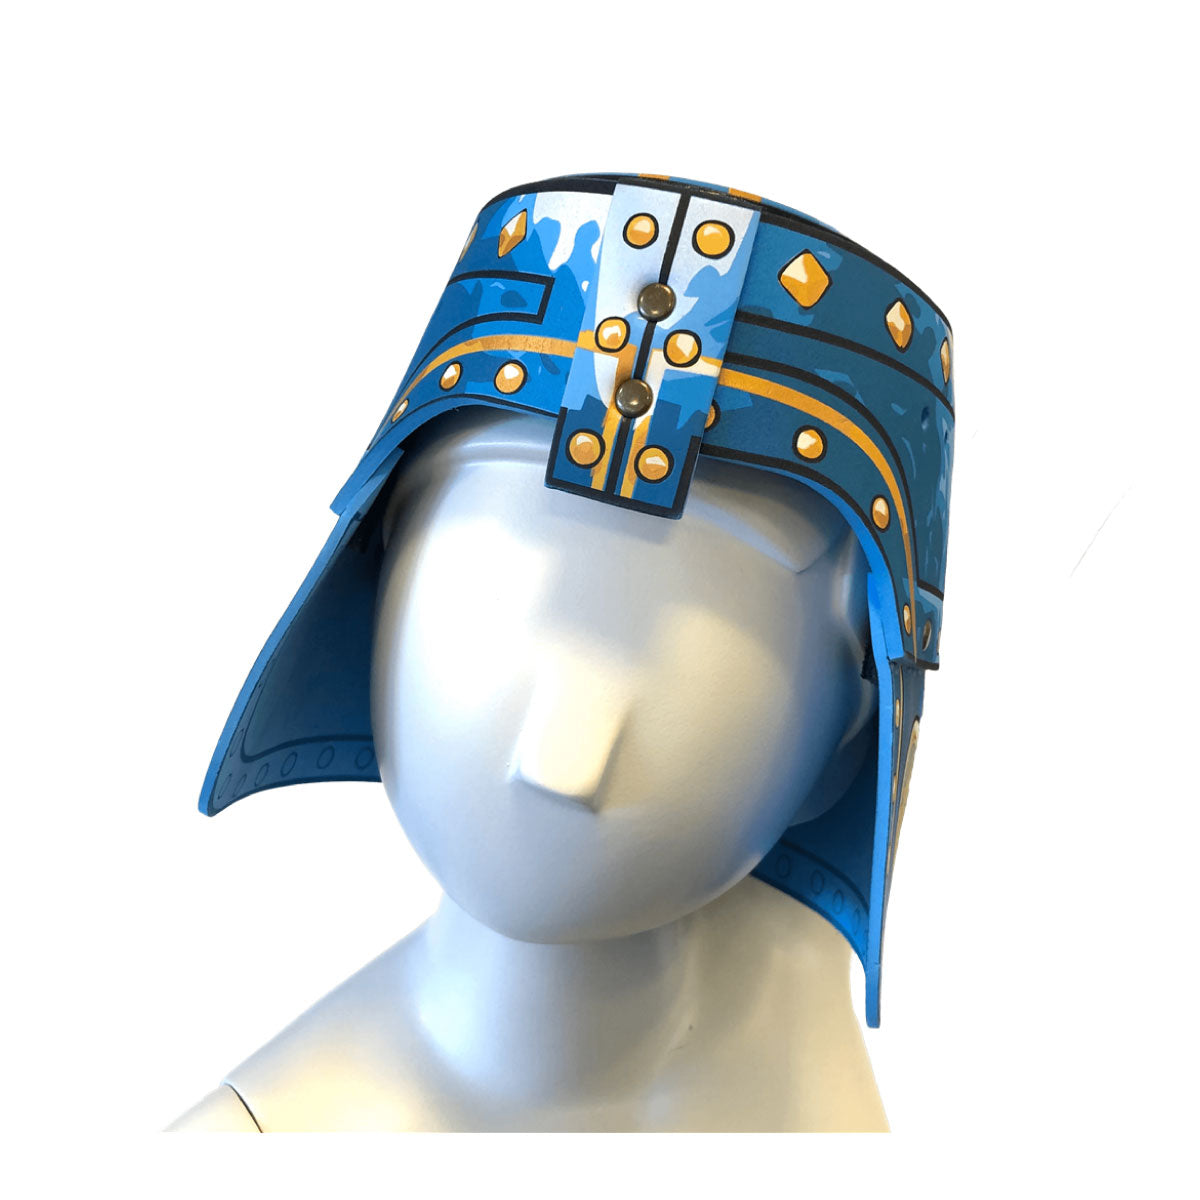 Noble Knight Blue Helmet from Liontouch